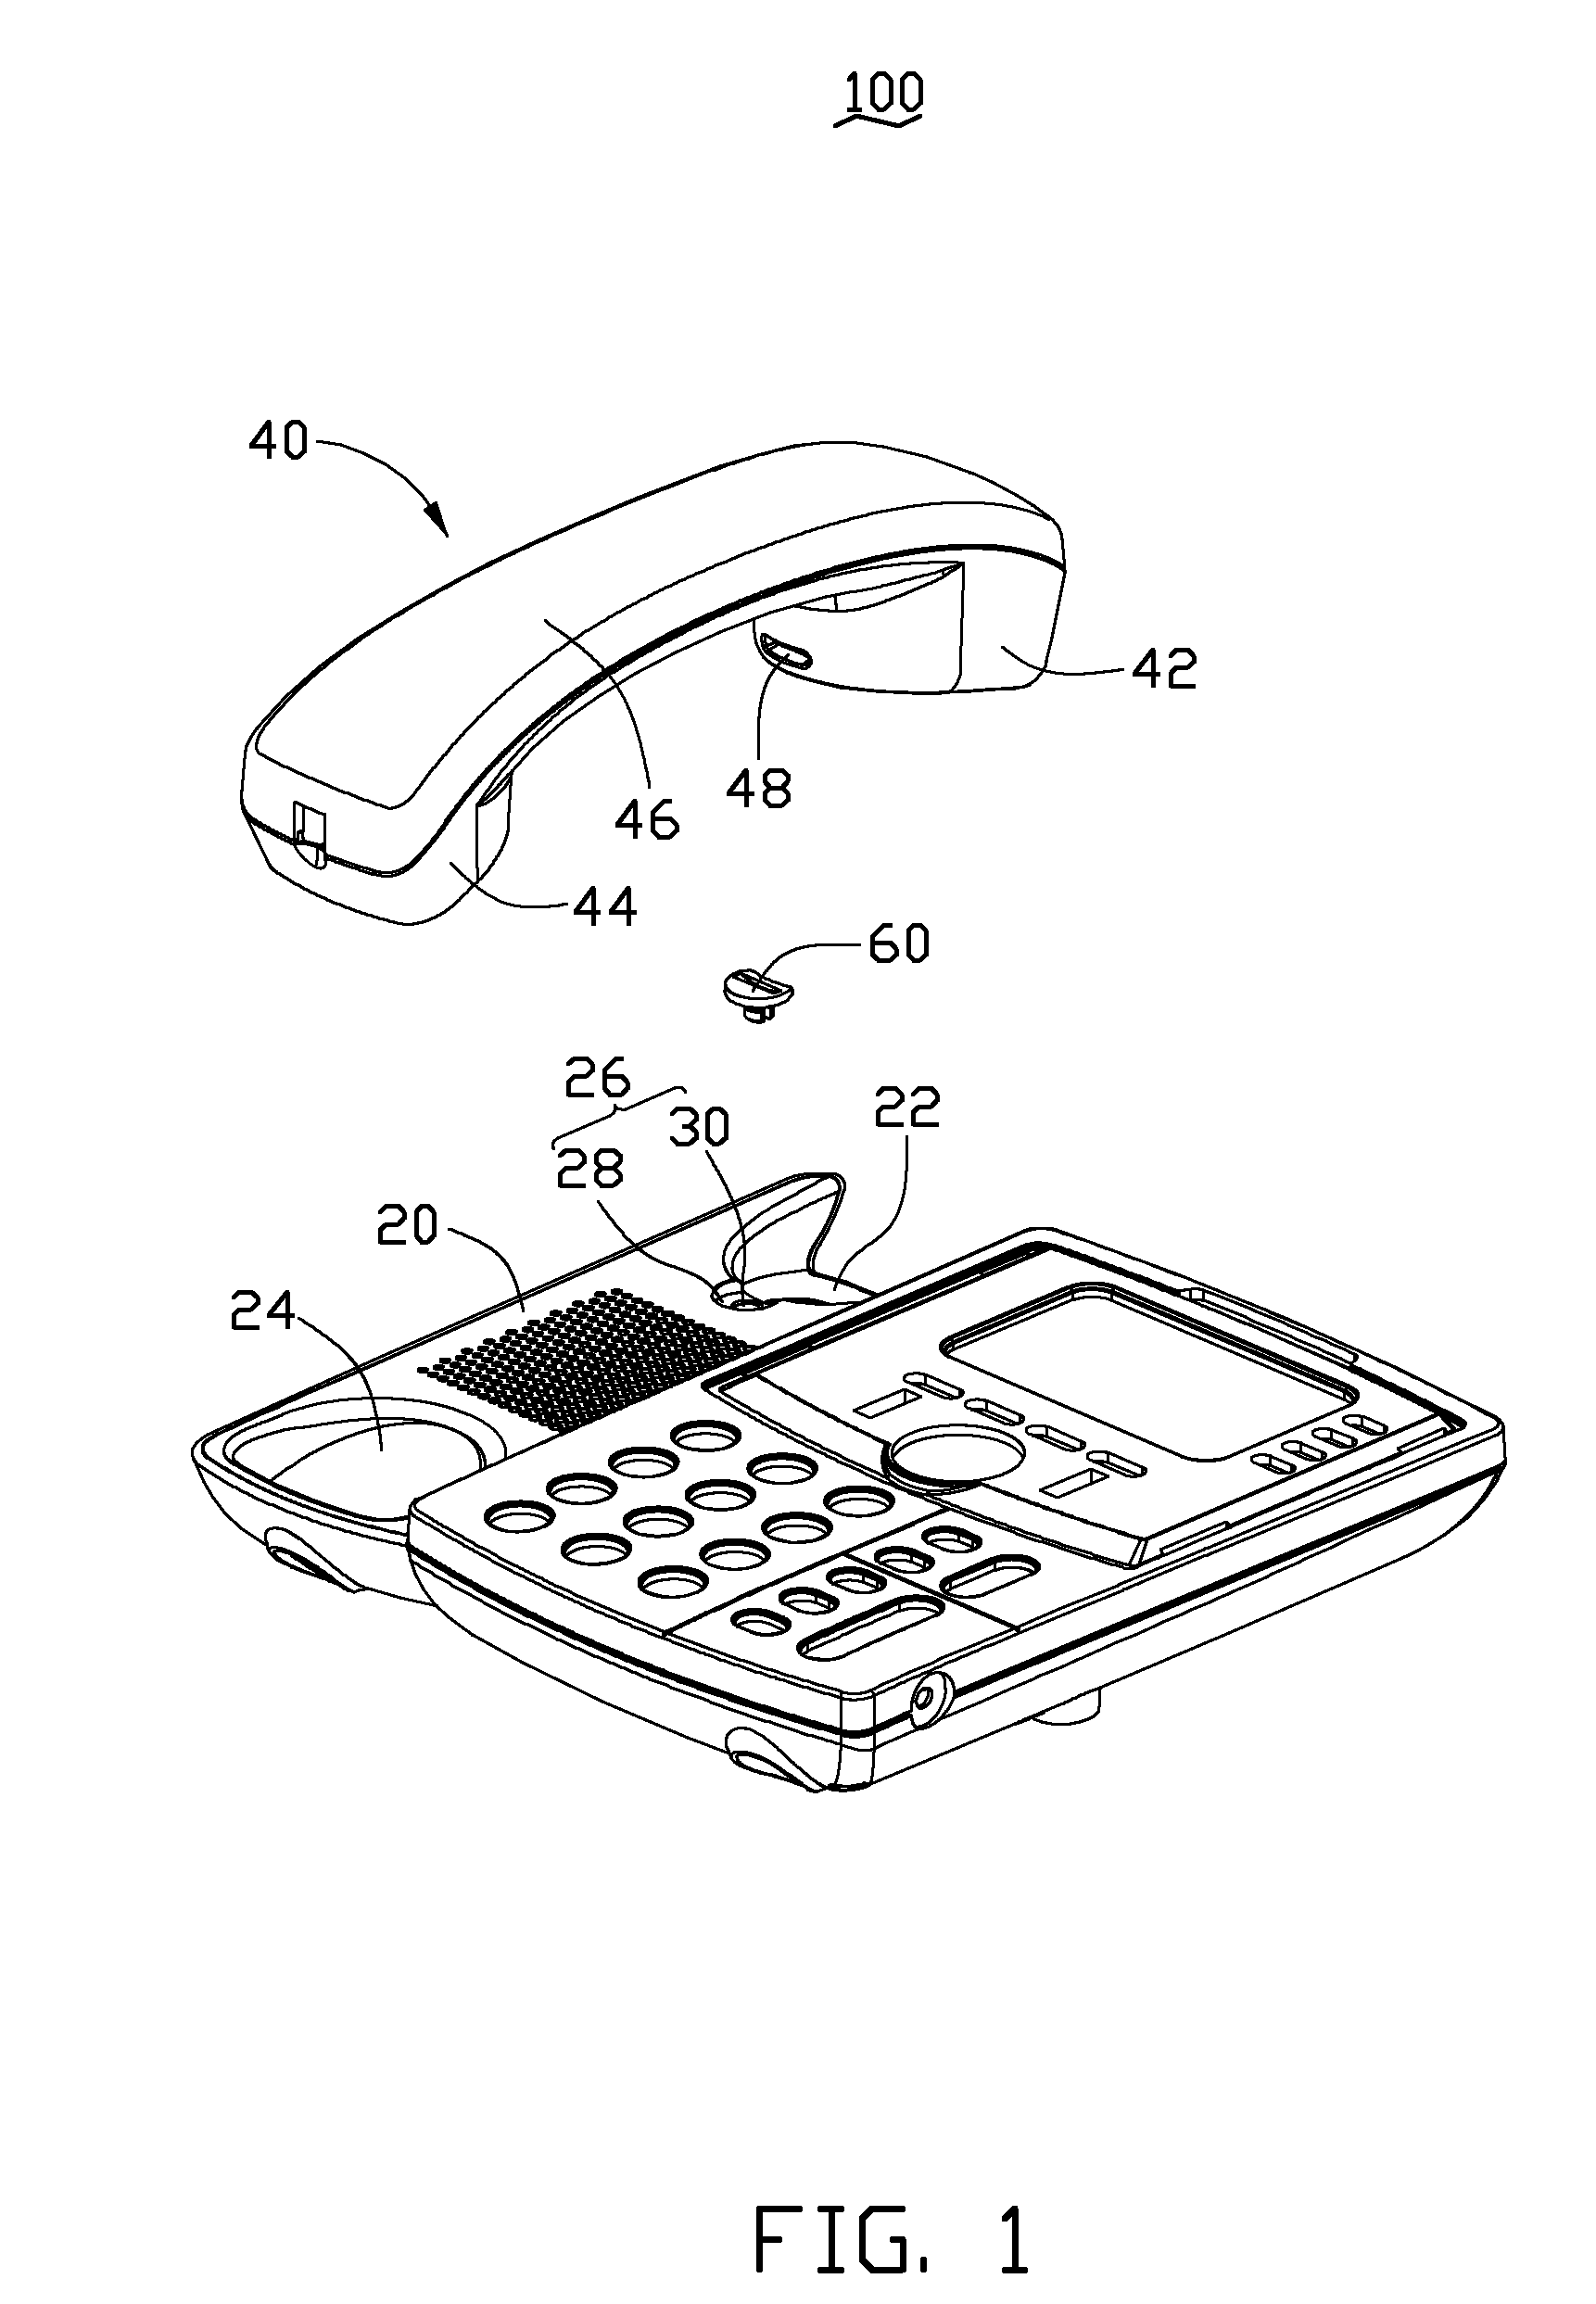 Telephone having rotatable hook to support handset